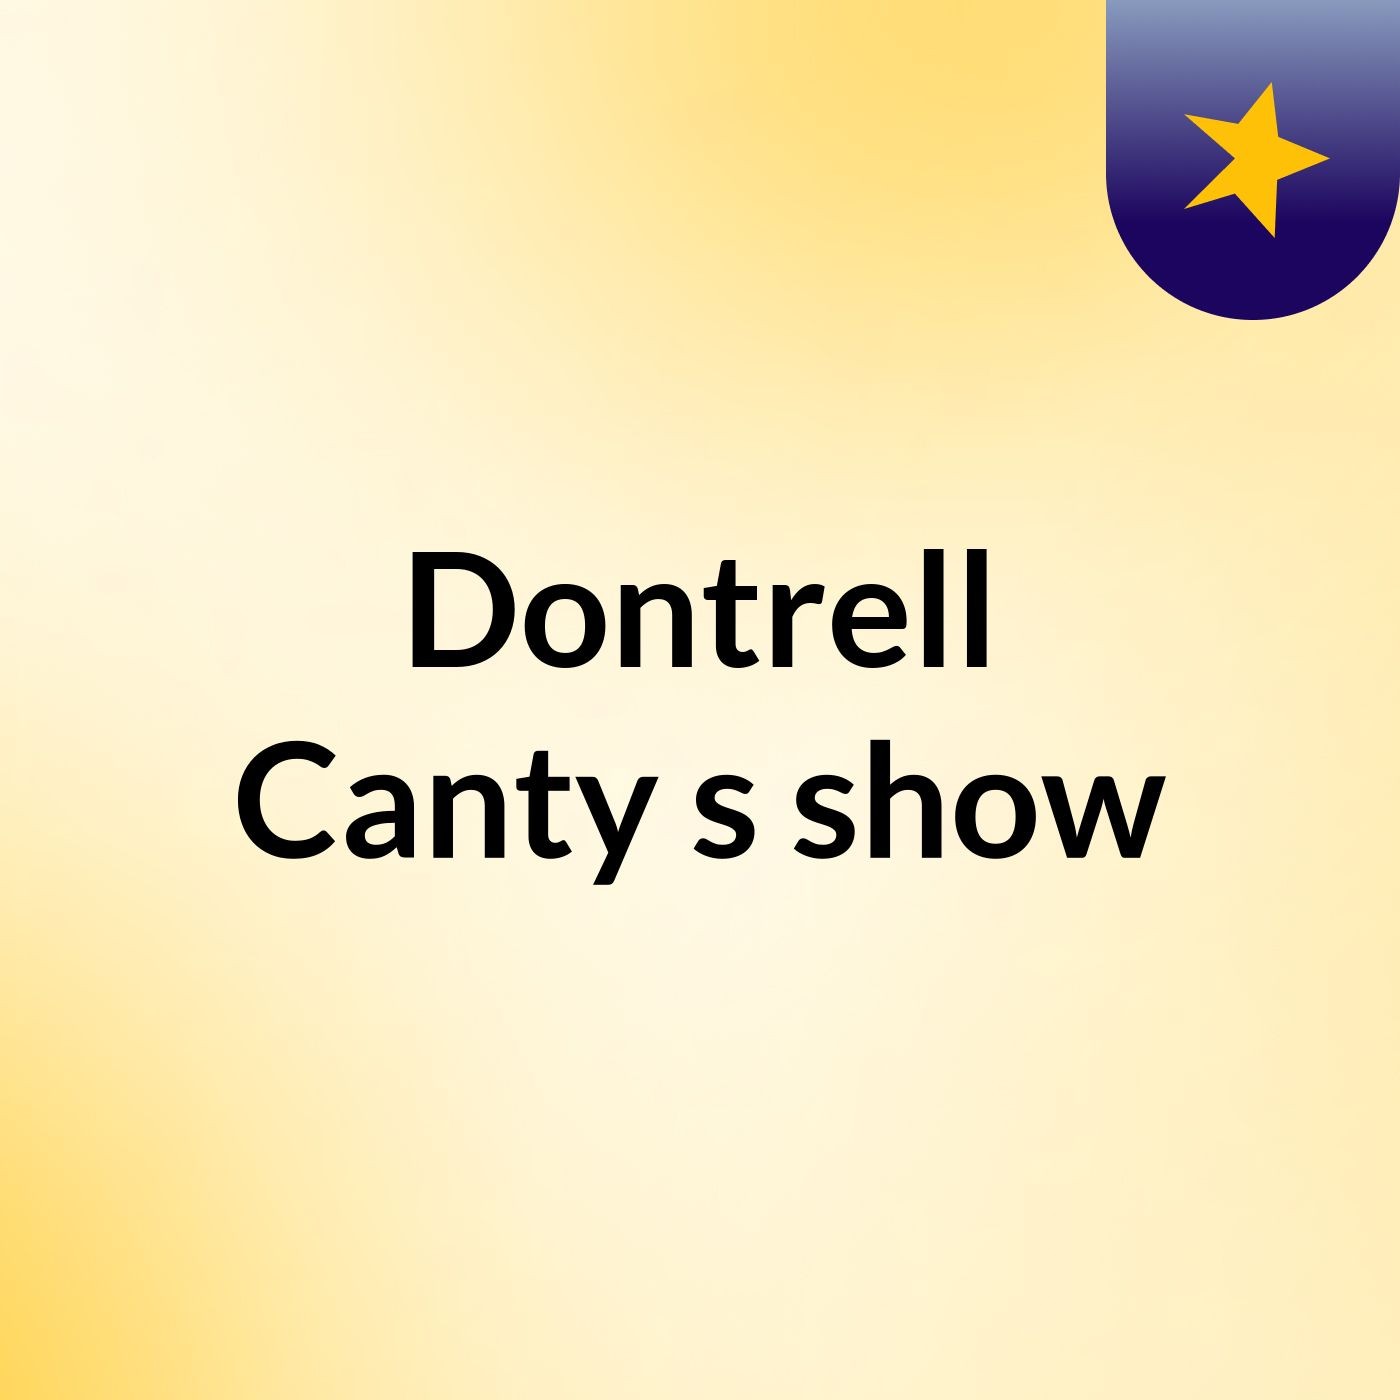 Dontrell Canty's show